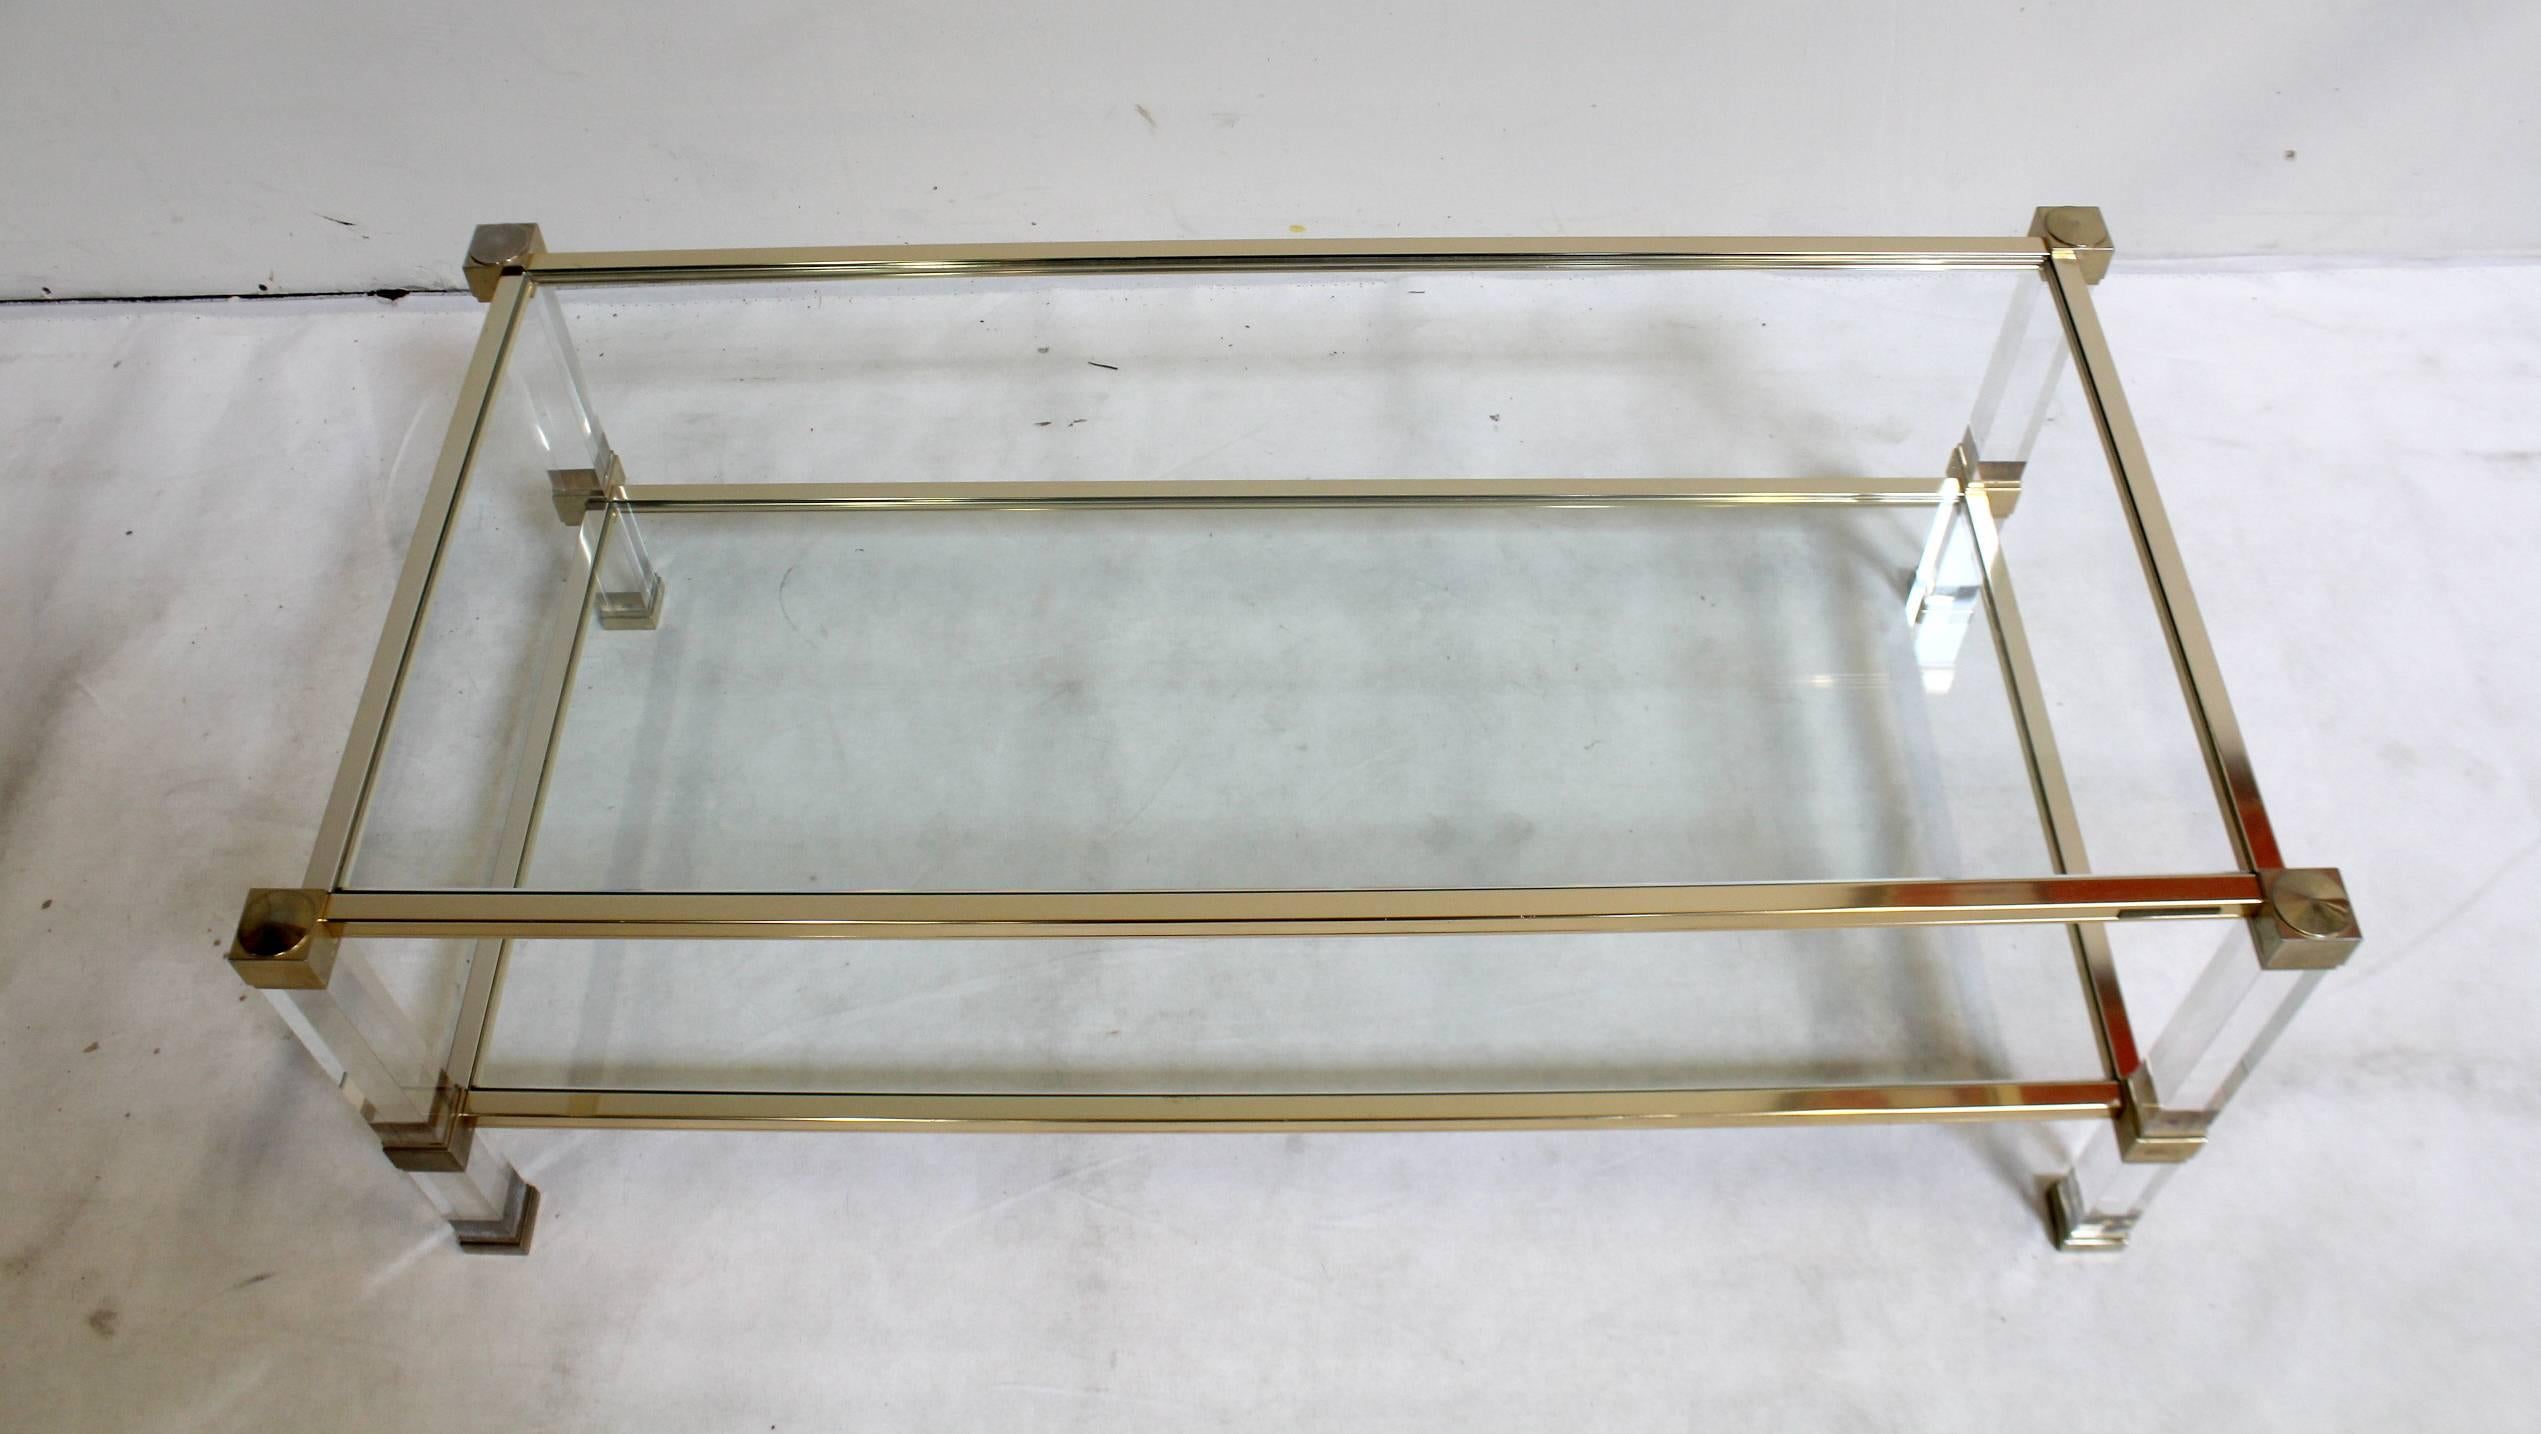 1970's brass-plated metal, lucite and glass coffee table signed Pierre Vandel, Paris.

Glass is in perfect condition, table shows small signs of wear.

